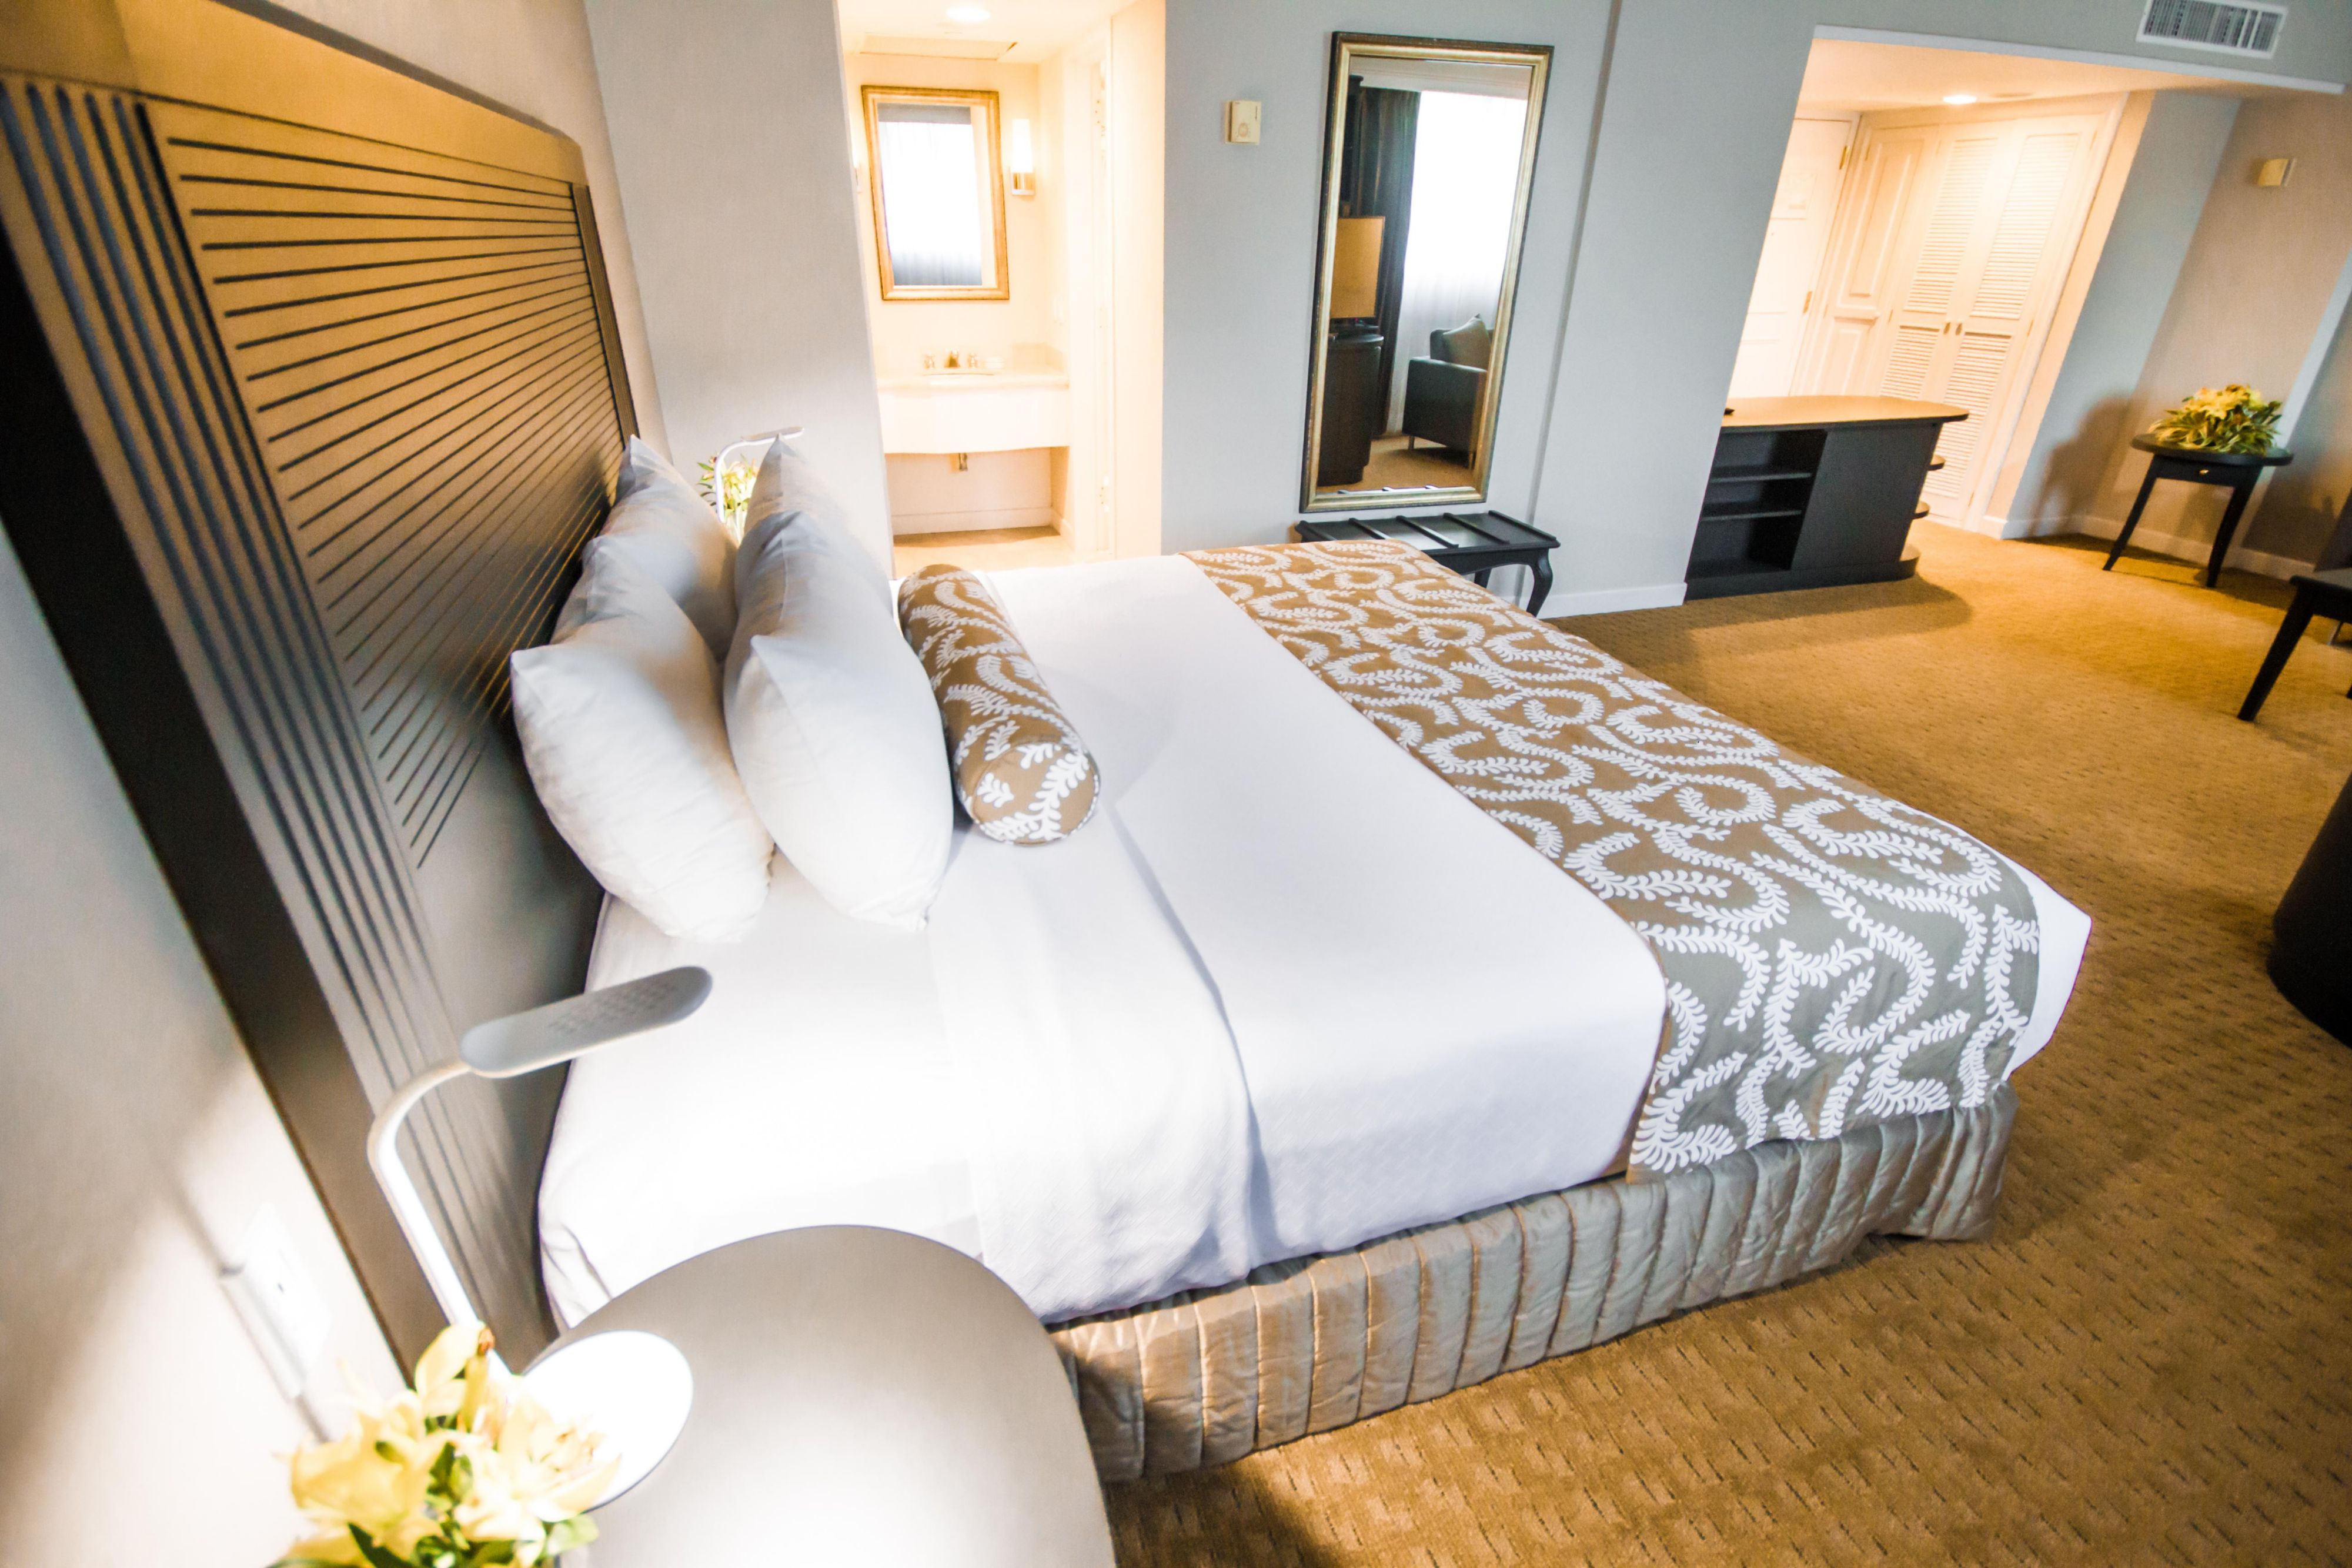 Rest assured in our king-sized bed suite.